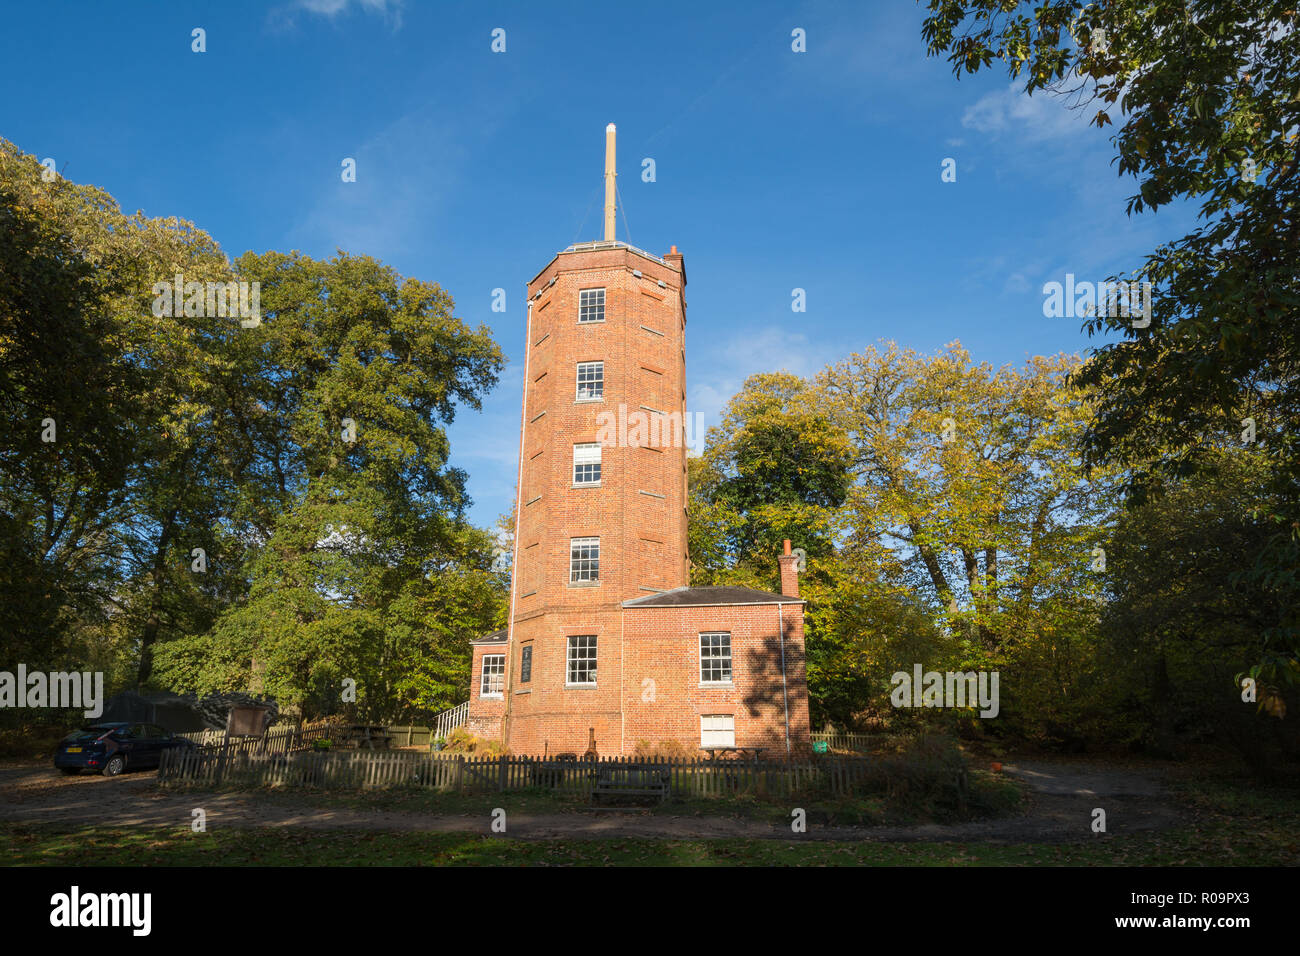 Chatley Heath Semaphore Tower, a landmark that was built as part of the Admiralty semaphore chain which operated between 1822 and 1847, Surrey, UK Stock Photo